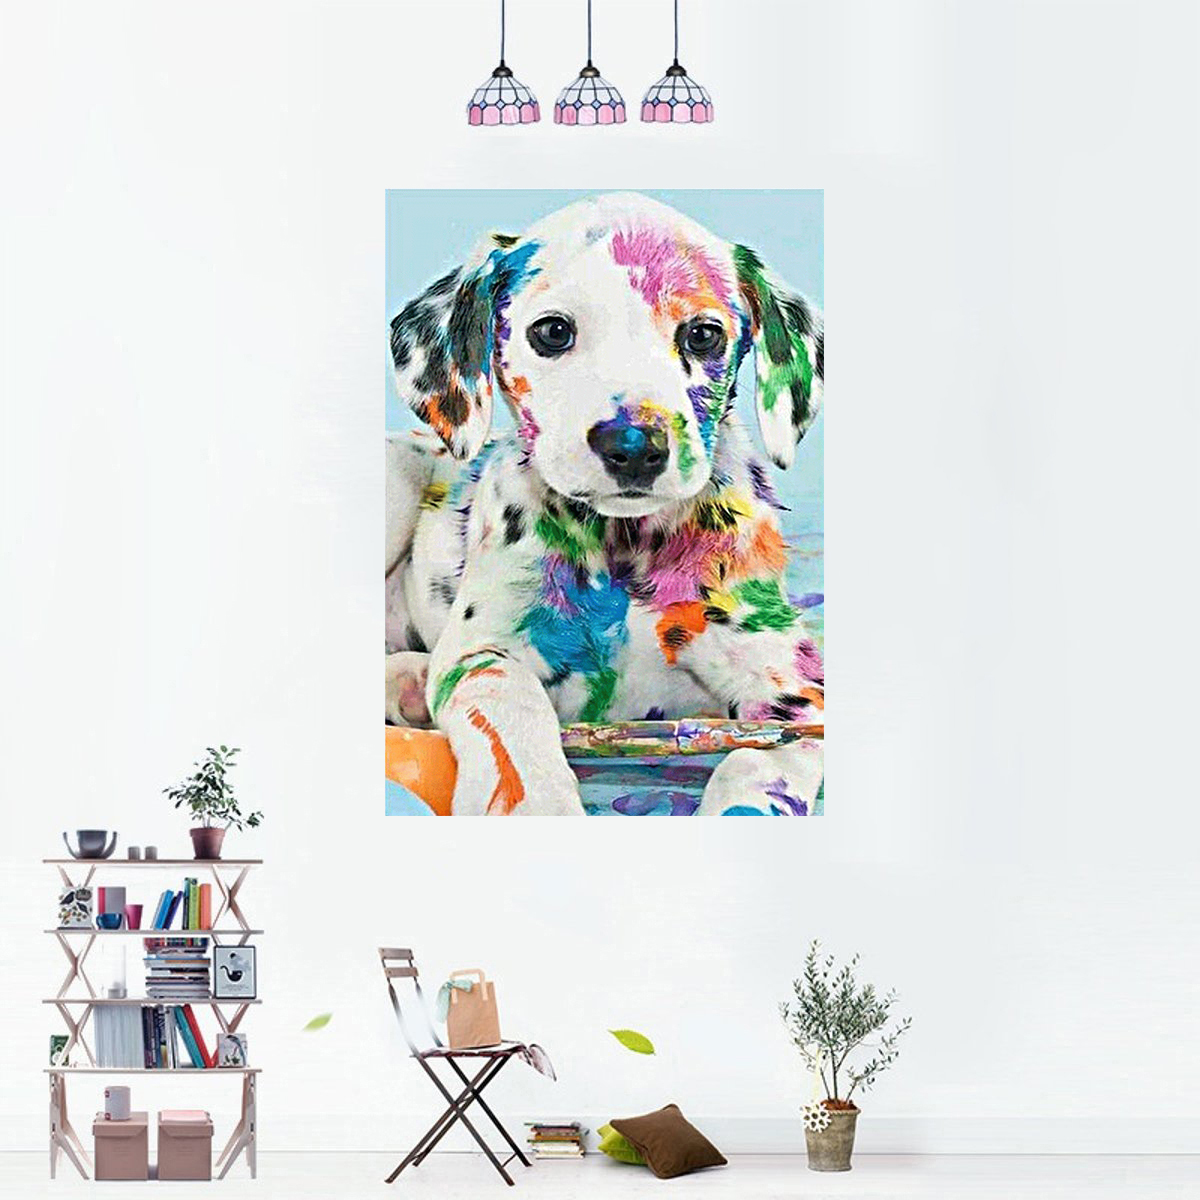 DIY-Diamond-Painting-Animal-Dog-Wall-Painting-Hanging-Pictures-Handmade-Wall-Decorations-Gifts-Drawi-1744046-7